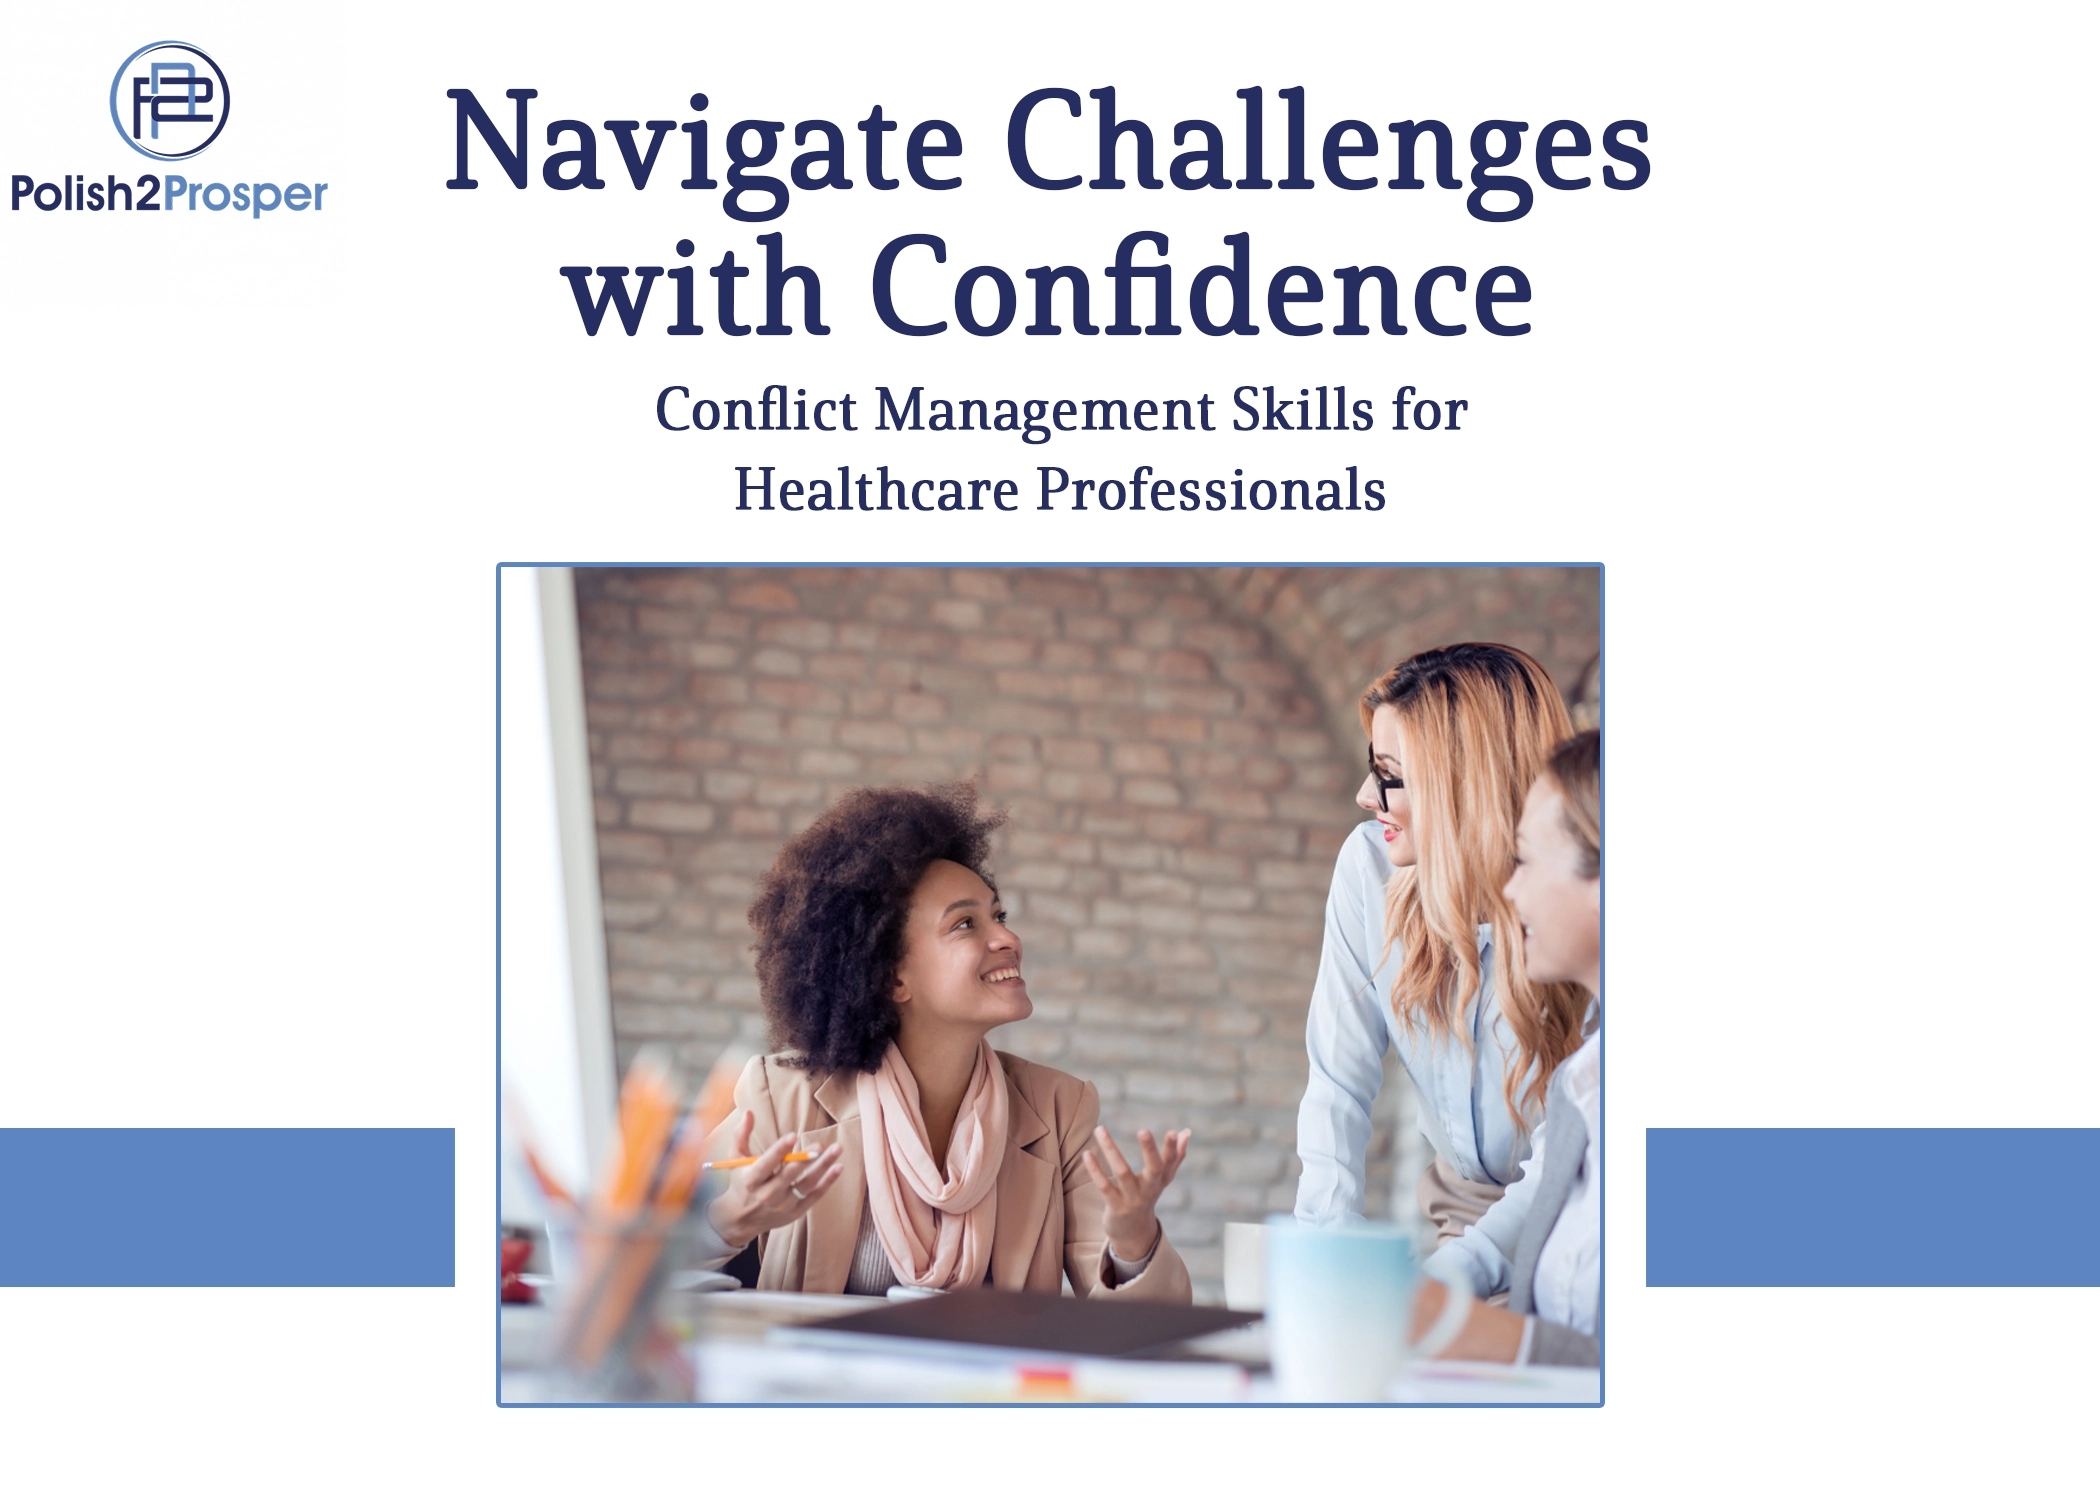 P2P ProductImage Template Navigate Challenges with Confidence